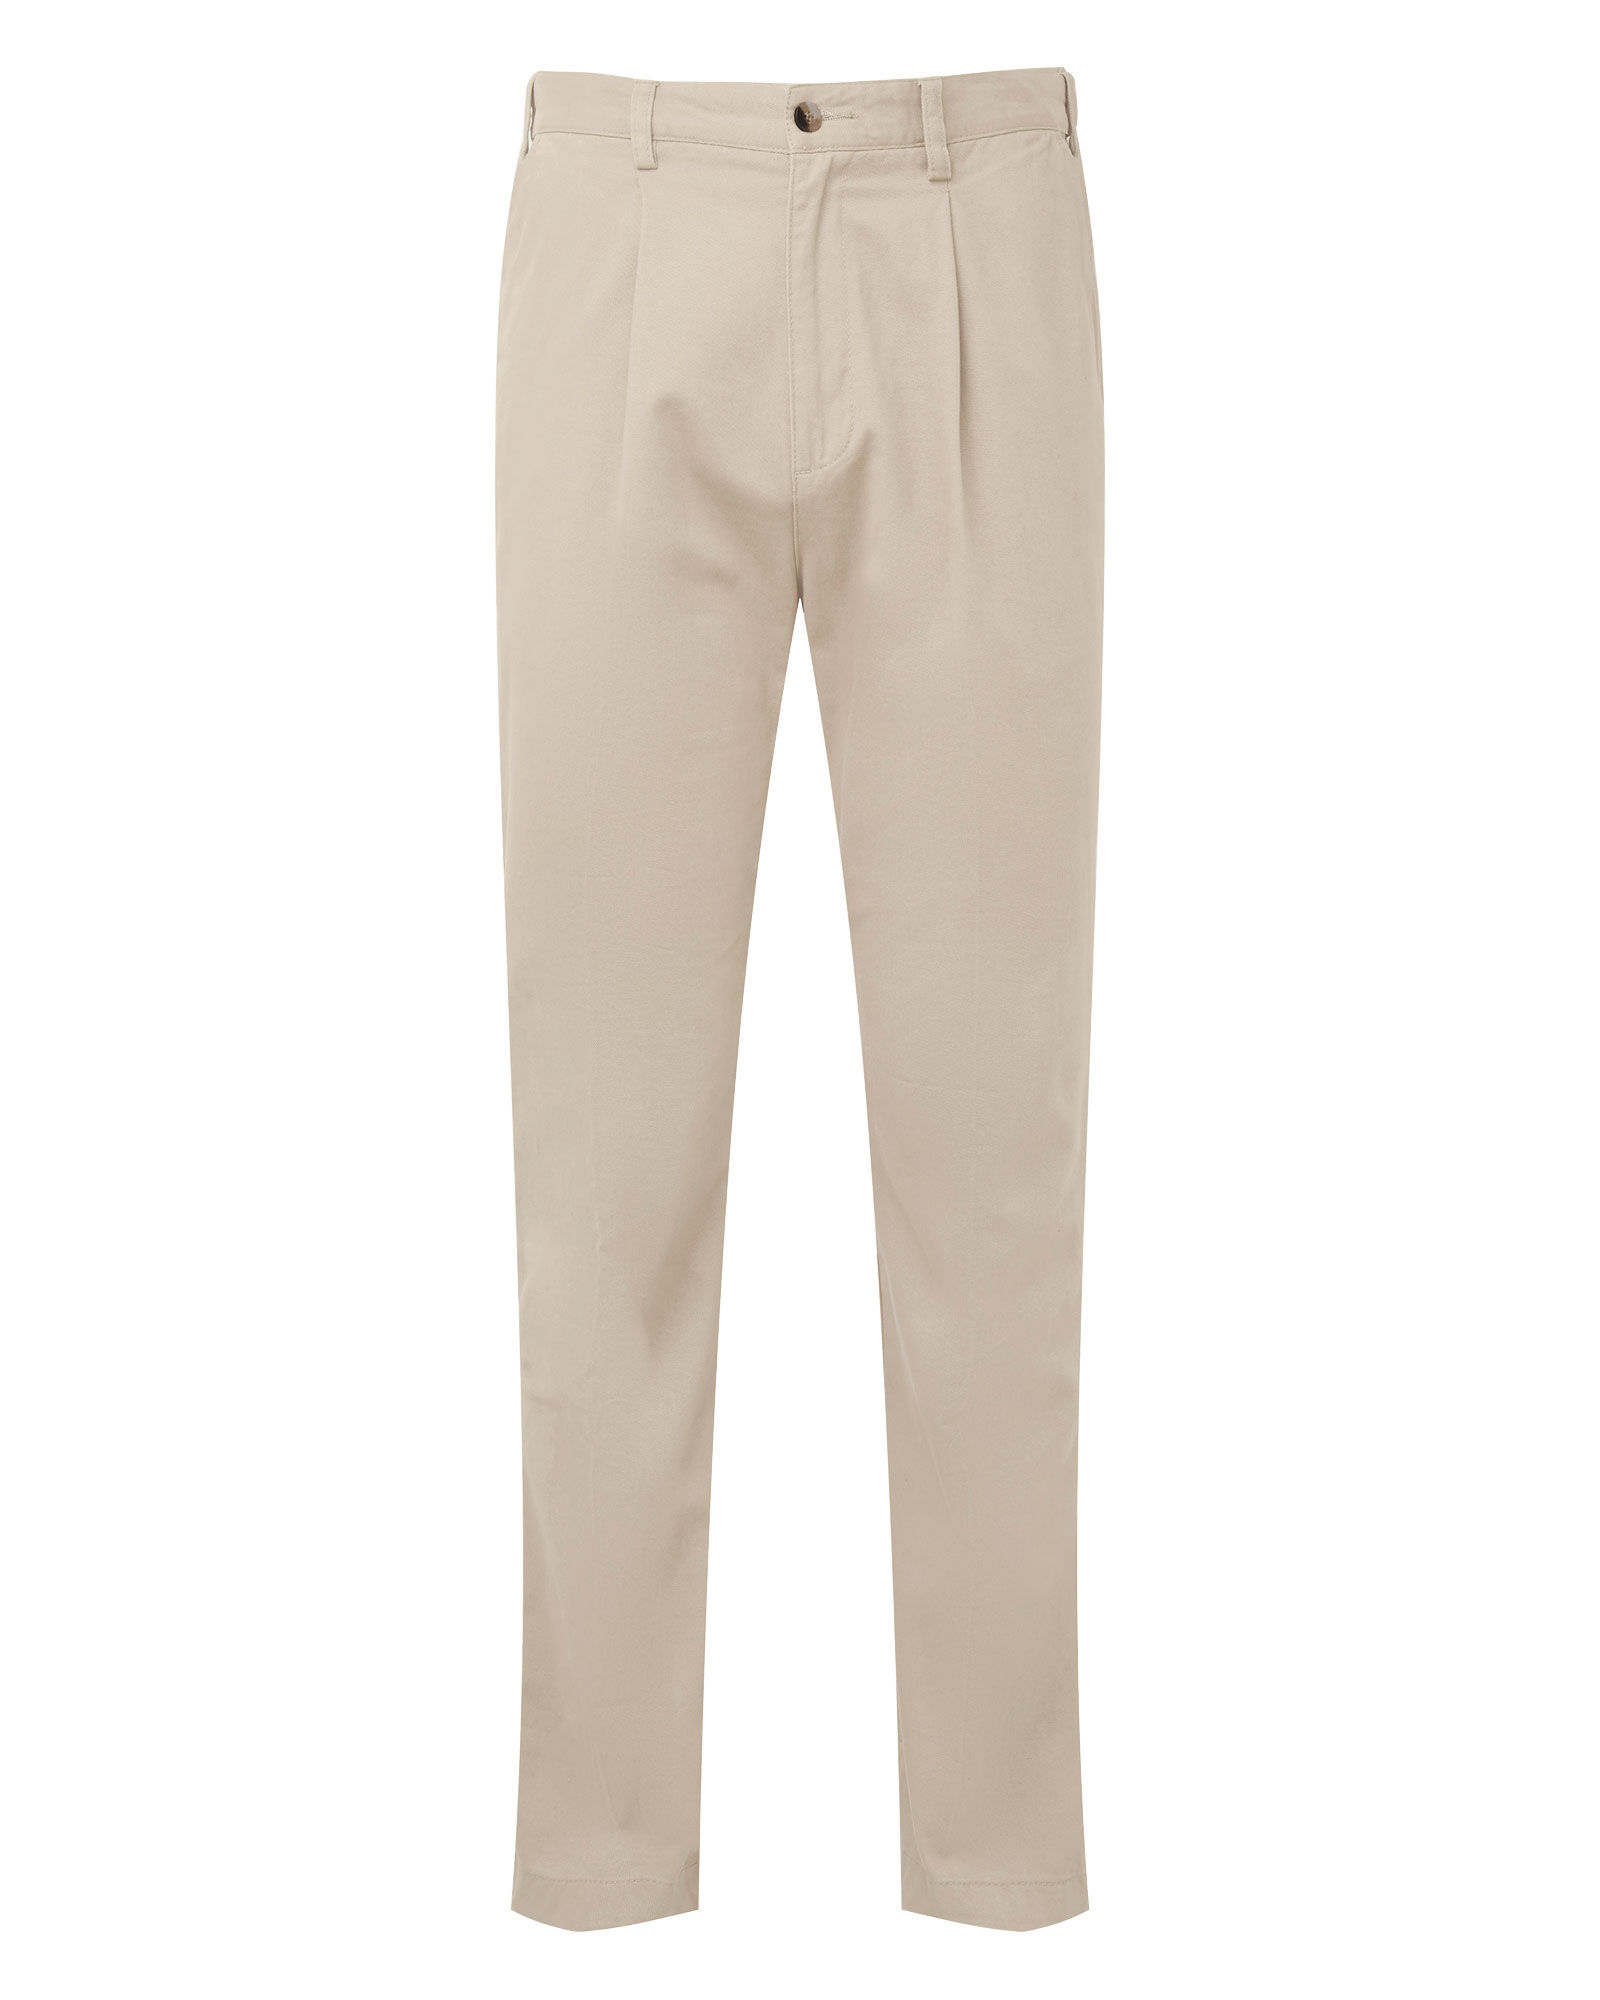 Slacks and Chinos Casual trousers and trousers Undercover Cotton Sweatpants in White for Men Mens Clothing Trousers 